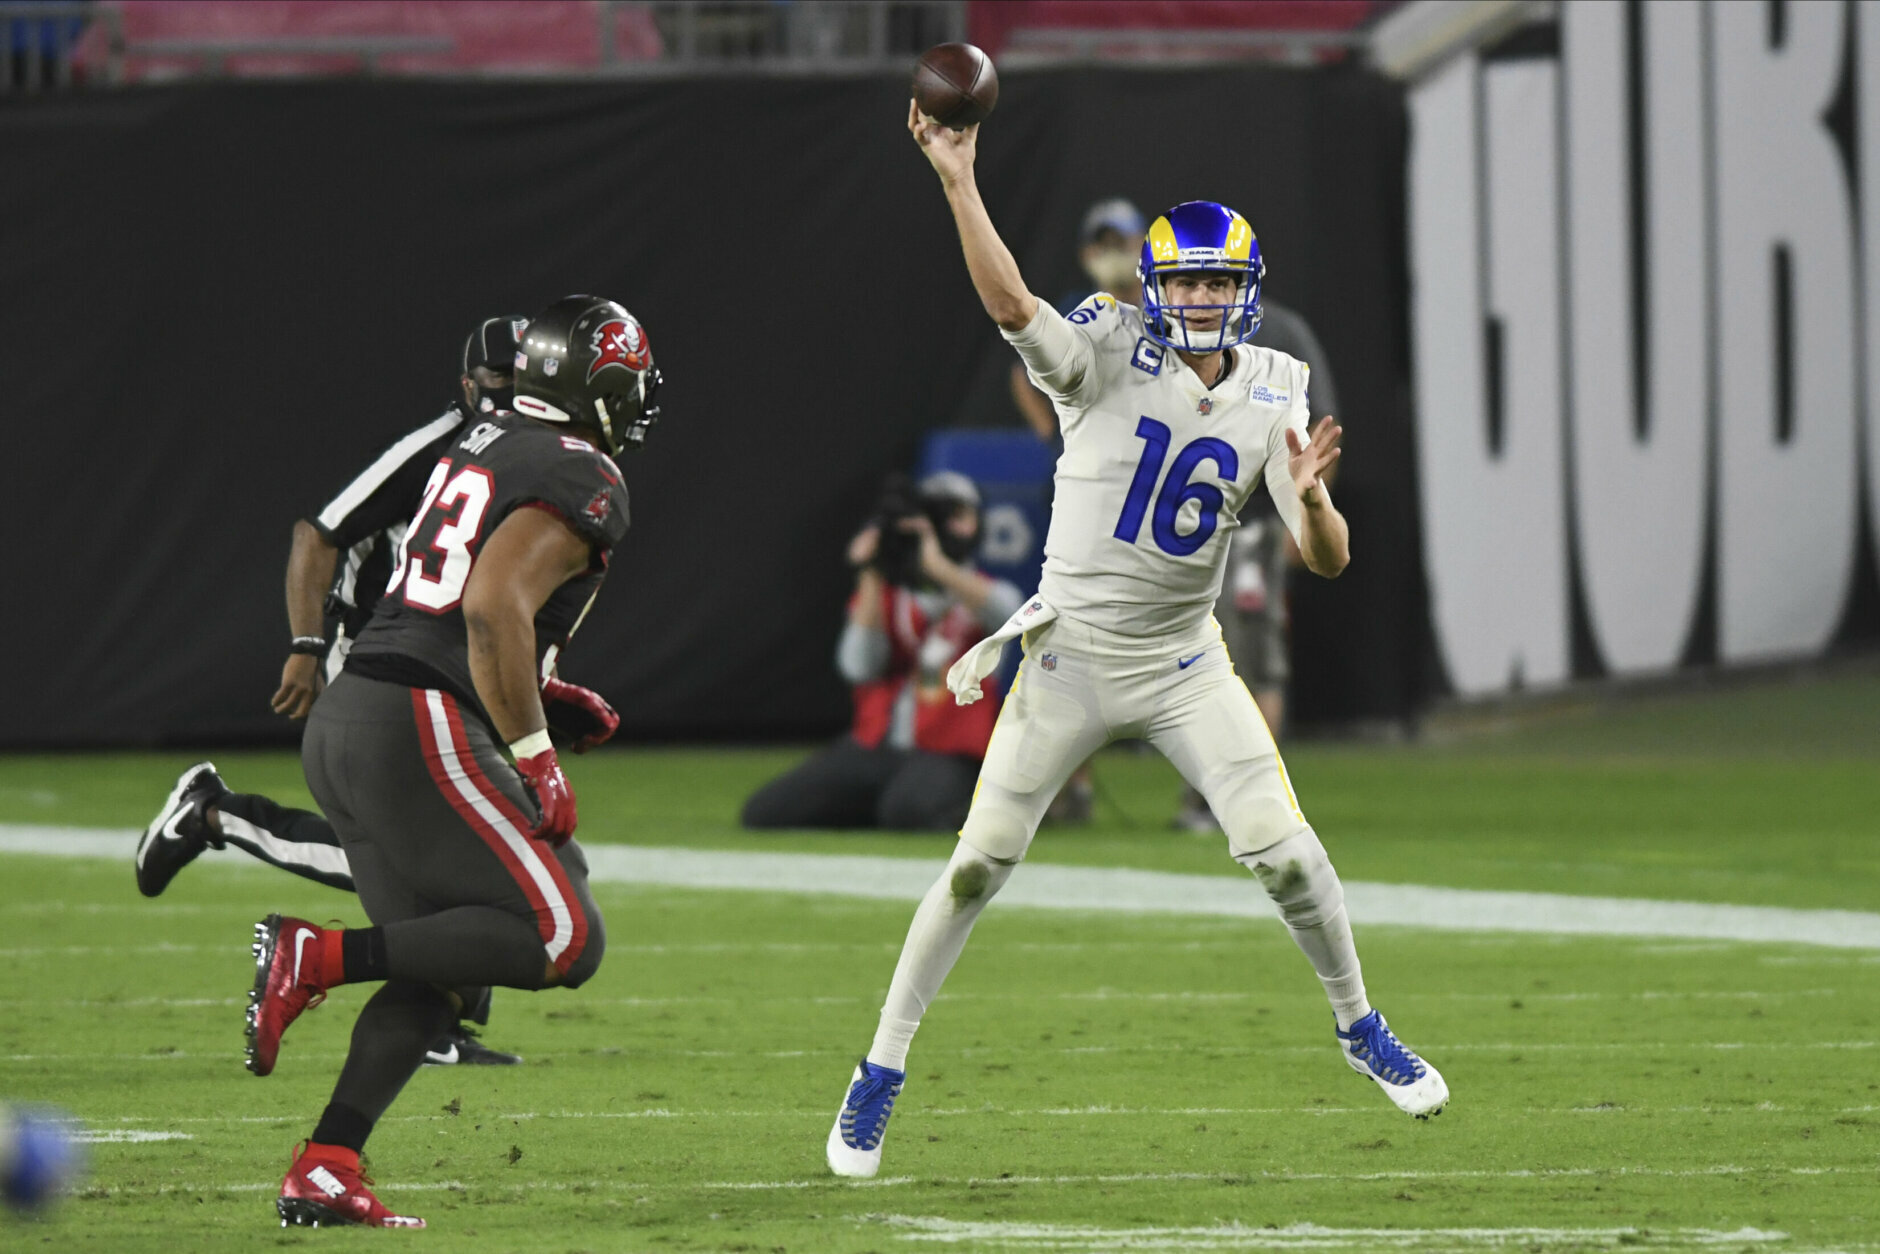 <p><b><i>Rams 27</i></b><br />
<b><i>Bucs 24</i></b></p>
<p>There was a lot to like about this game: <a href="https://wtop.com/nfl/2020/11/nfl-assembles-all-black-officiating-crew-for-first-time/  ">The NFL&#8217;s first all-Black officiating crew</a>. Tom Brady <a href="https://www.cbssports.com/nfl/news/tom-brady-forgets-the-rules-of-football-after-improbably-completing-a-pass-to-himself-against-rams/">completing a pass to himself</a> on the 20th anniversary of his NFL debut. <a href="https://twitter.com/ESPNStatsInfo/status/1331092882862825472?s=20">Jared Goff</a> and <a href="https://twitter.com/ESPNStatsInfo/status/1331077420510810113?s=20">his receivers</a> connecting so many times they made MNF history. This was <a href="https://profootballtalk.nbcsports.com/2020/11/22/sean-mcvay-hopes-monday-night-will-be-kind-of-a-breakthrough-for-explosive-plays/">the breakthrough Sean McVay was looking for</a> and if Goff can cut down the picks, the NFC West belongs to L.A.</p>
<p>And let&#8217;s not read too much into Tampa Bay&#8217;s loss. The Bucs tried hard to <a href="https://profootballtalk.nbcsports.com/2020/11/16/bucs-will-try-to-change-primetime-mojo-by-practicing-at-night-this-week/">change up their primetime mojo</a> but they&#8217;re simply <a href="https://www.joebucsfan.com/2020/11/bruce-arians-says-bucs-are-a-really-tired-team-details-schedule-change/">a tired team</a> limping their way to the latest bye week in NFL history (Week 13). Once they take their beating from the Chiefs, their final four games are very winnable and who knows how the Saints close out without Drew Brees. Brady&#8217;s Bucs will be fine.</p>
